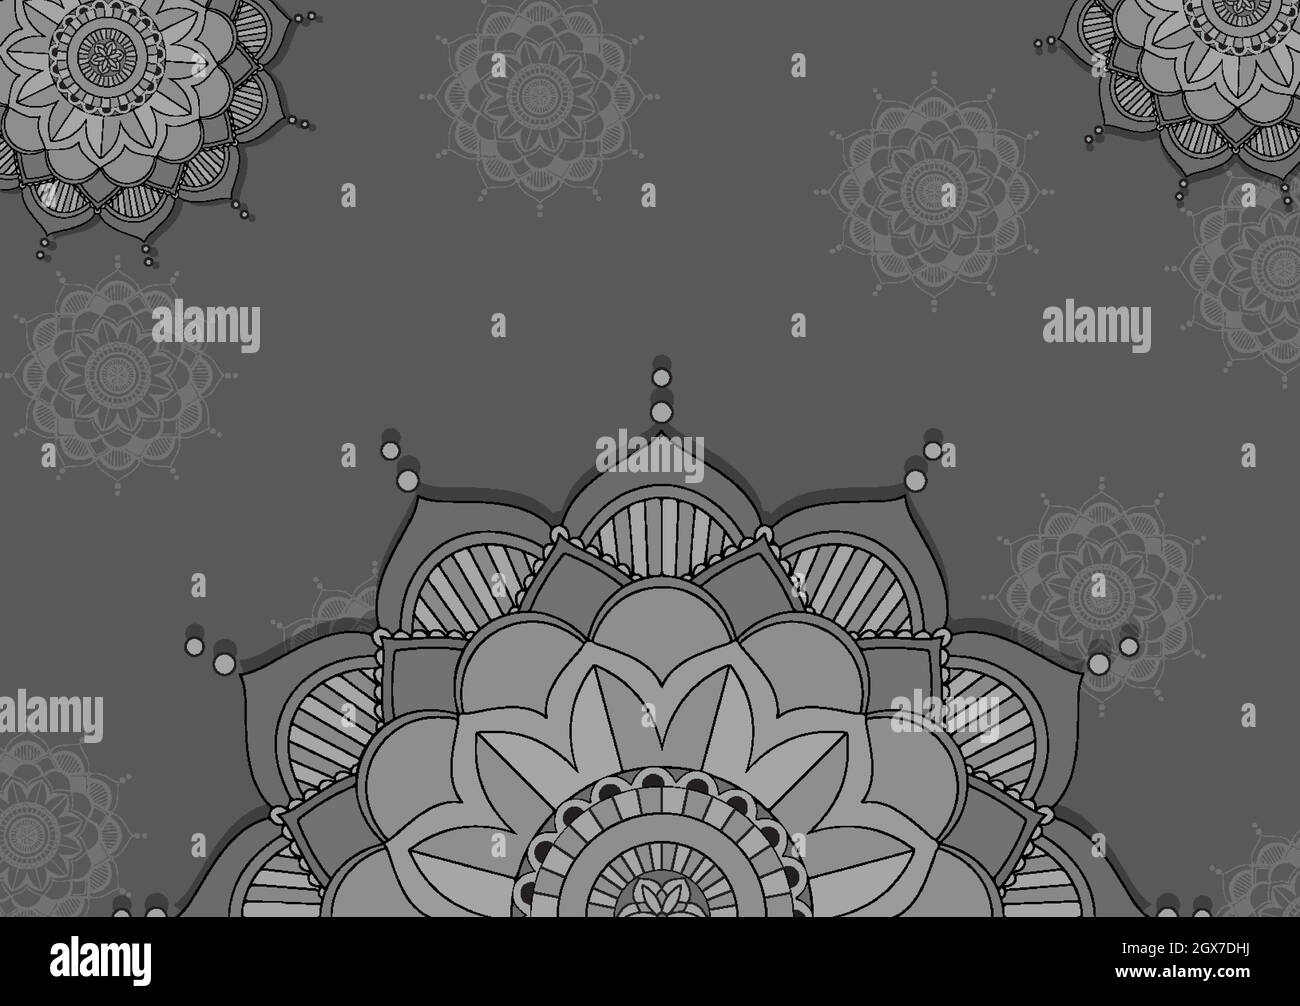 Background template with mandala pattern design in gray color Stock Vector